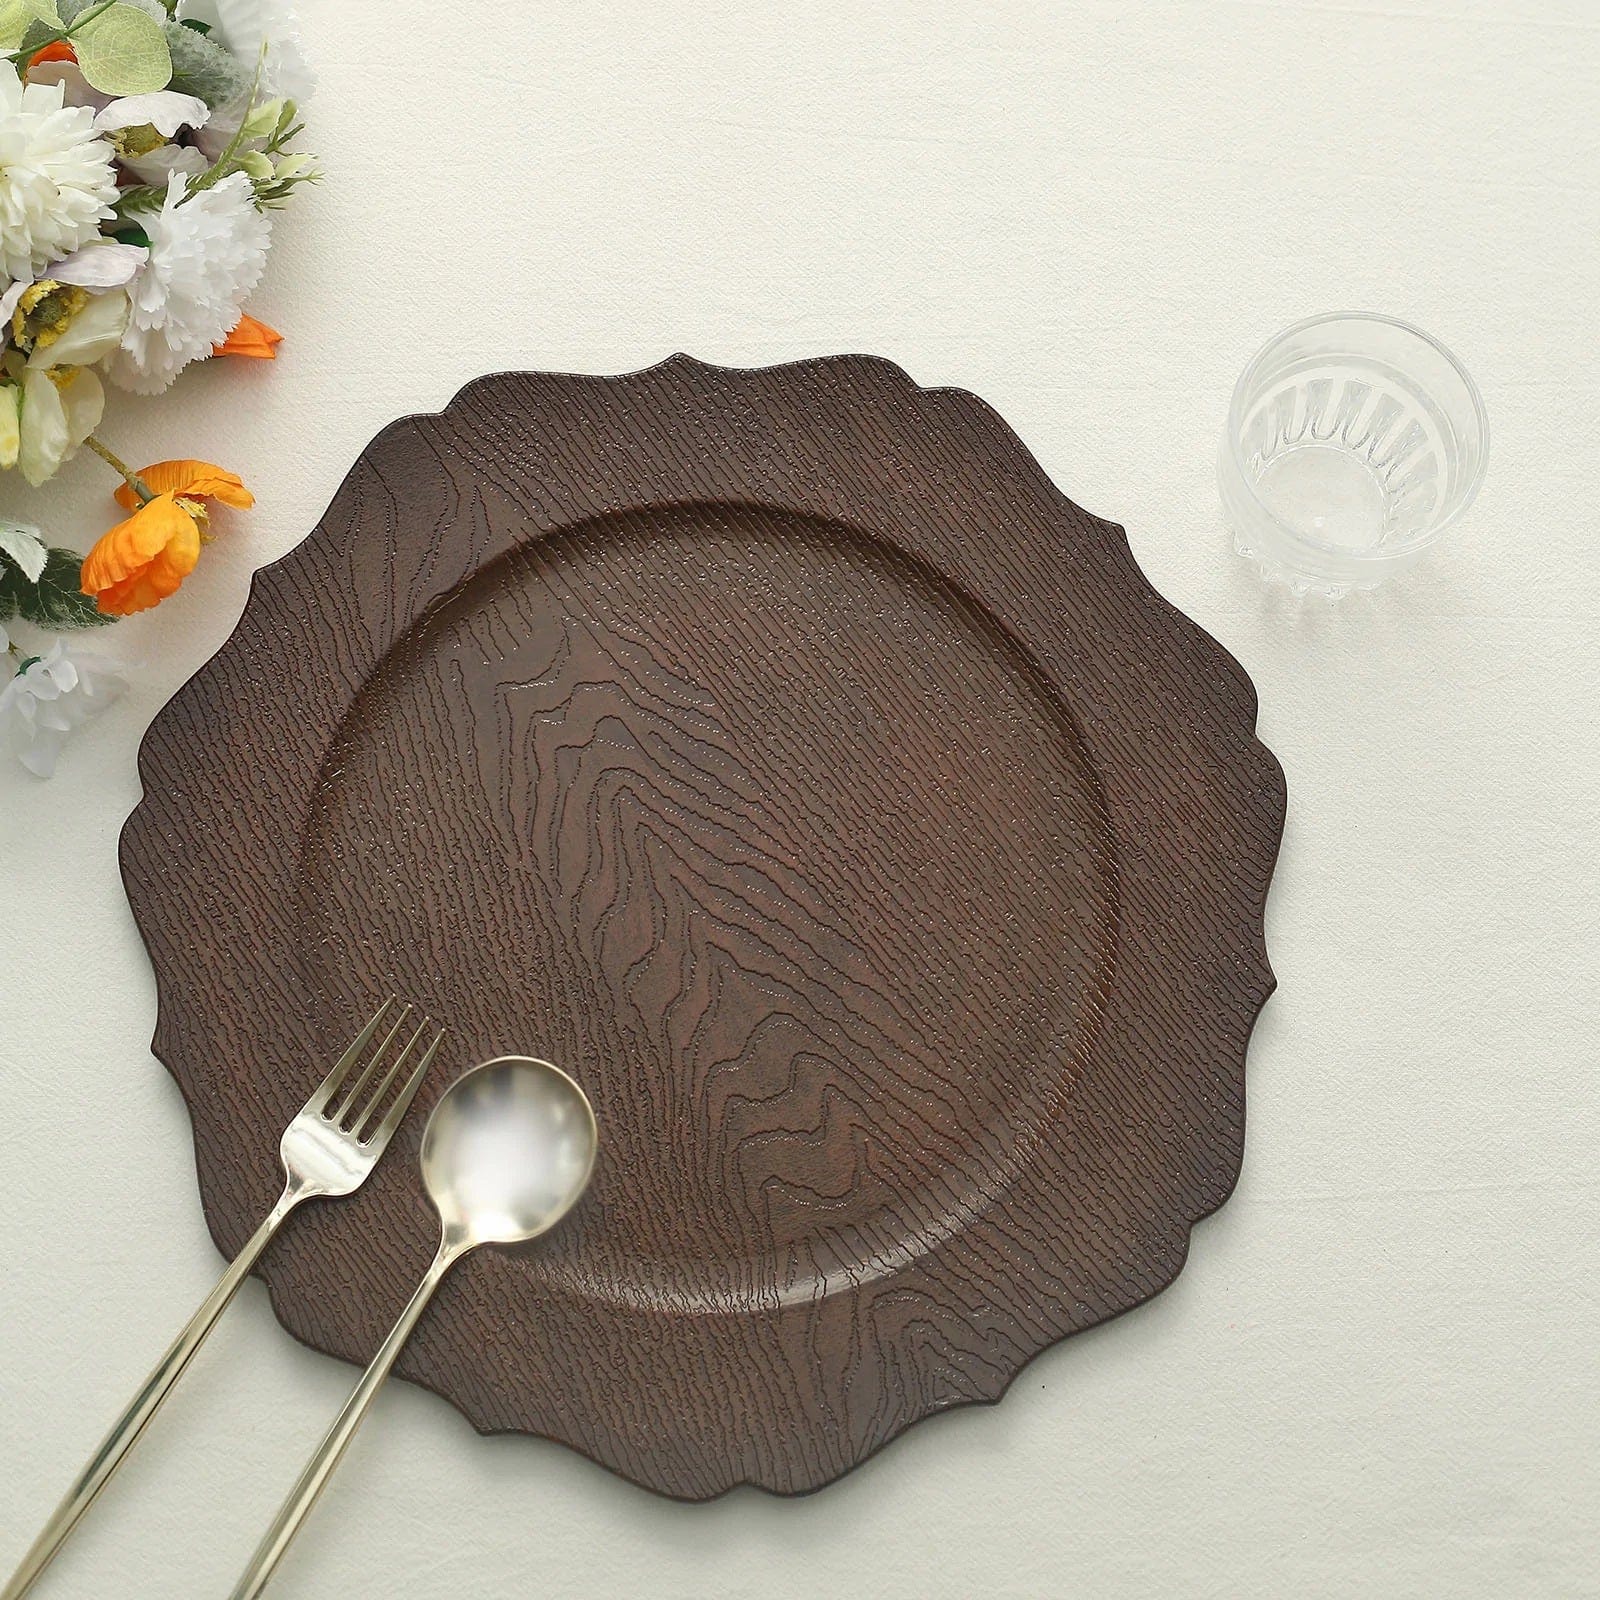 6 Rustic 13 in Wooden Round Acrylic Charger Plates with Scalloped Trim